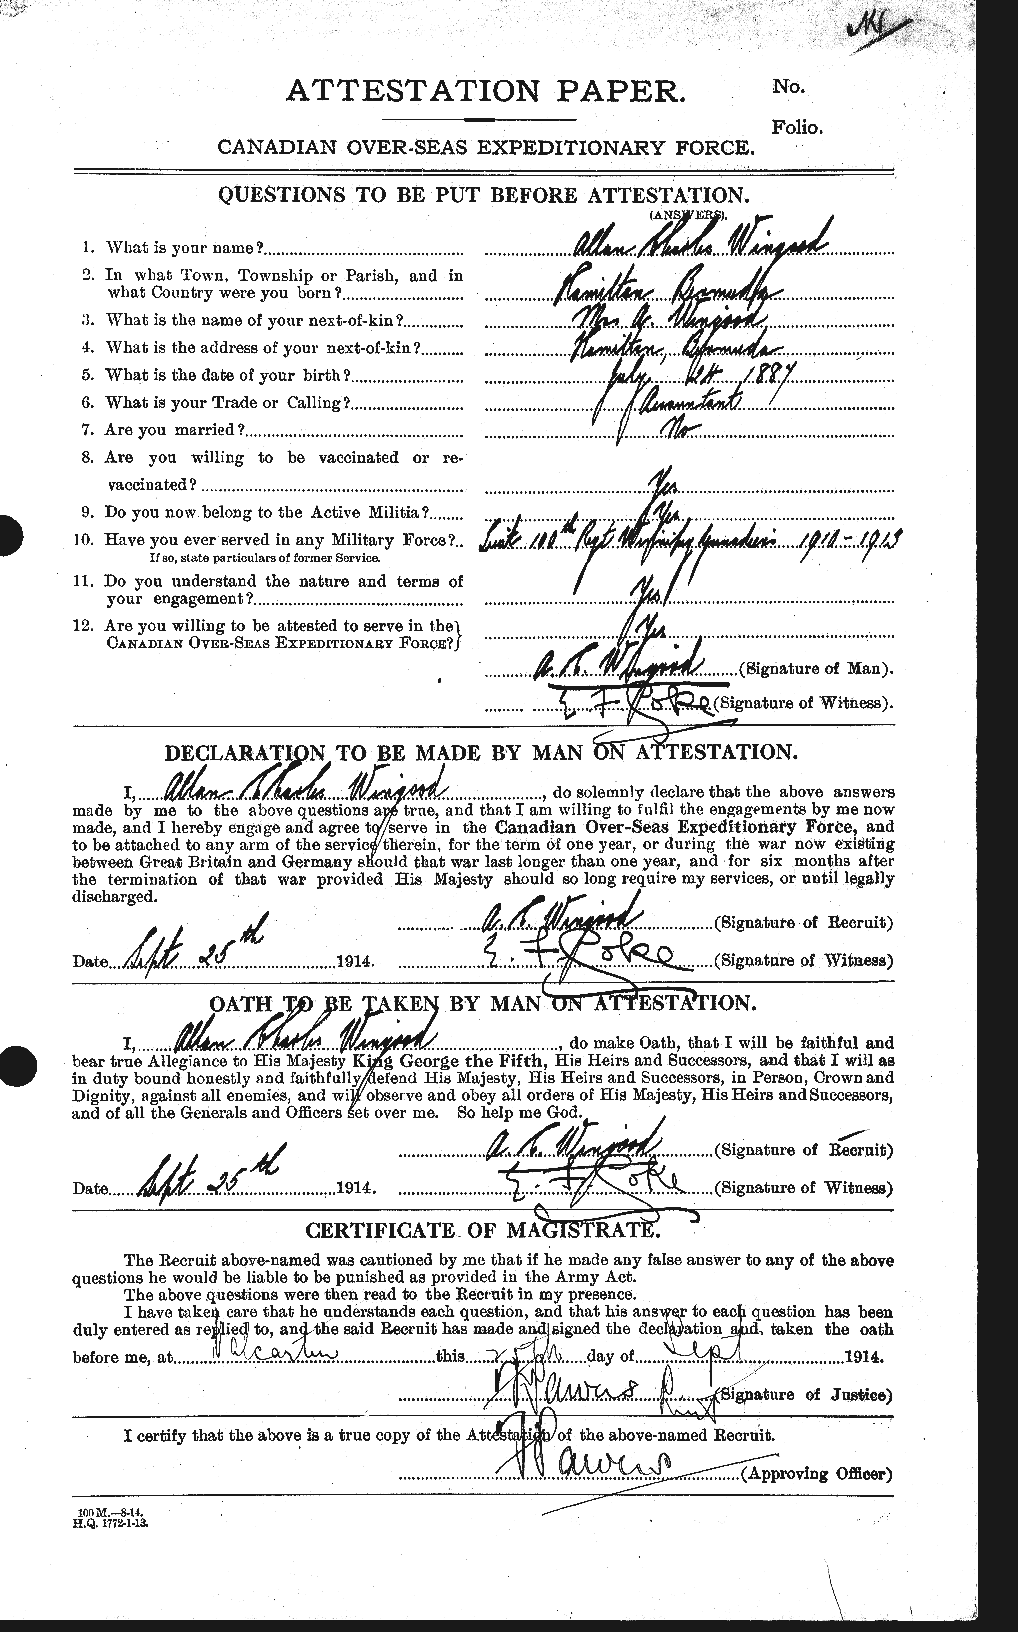 Personnel Records of the First World War - CEF 679019a